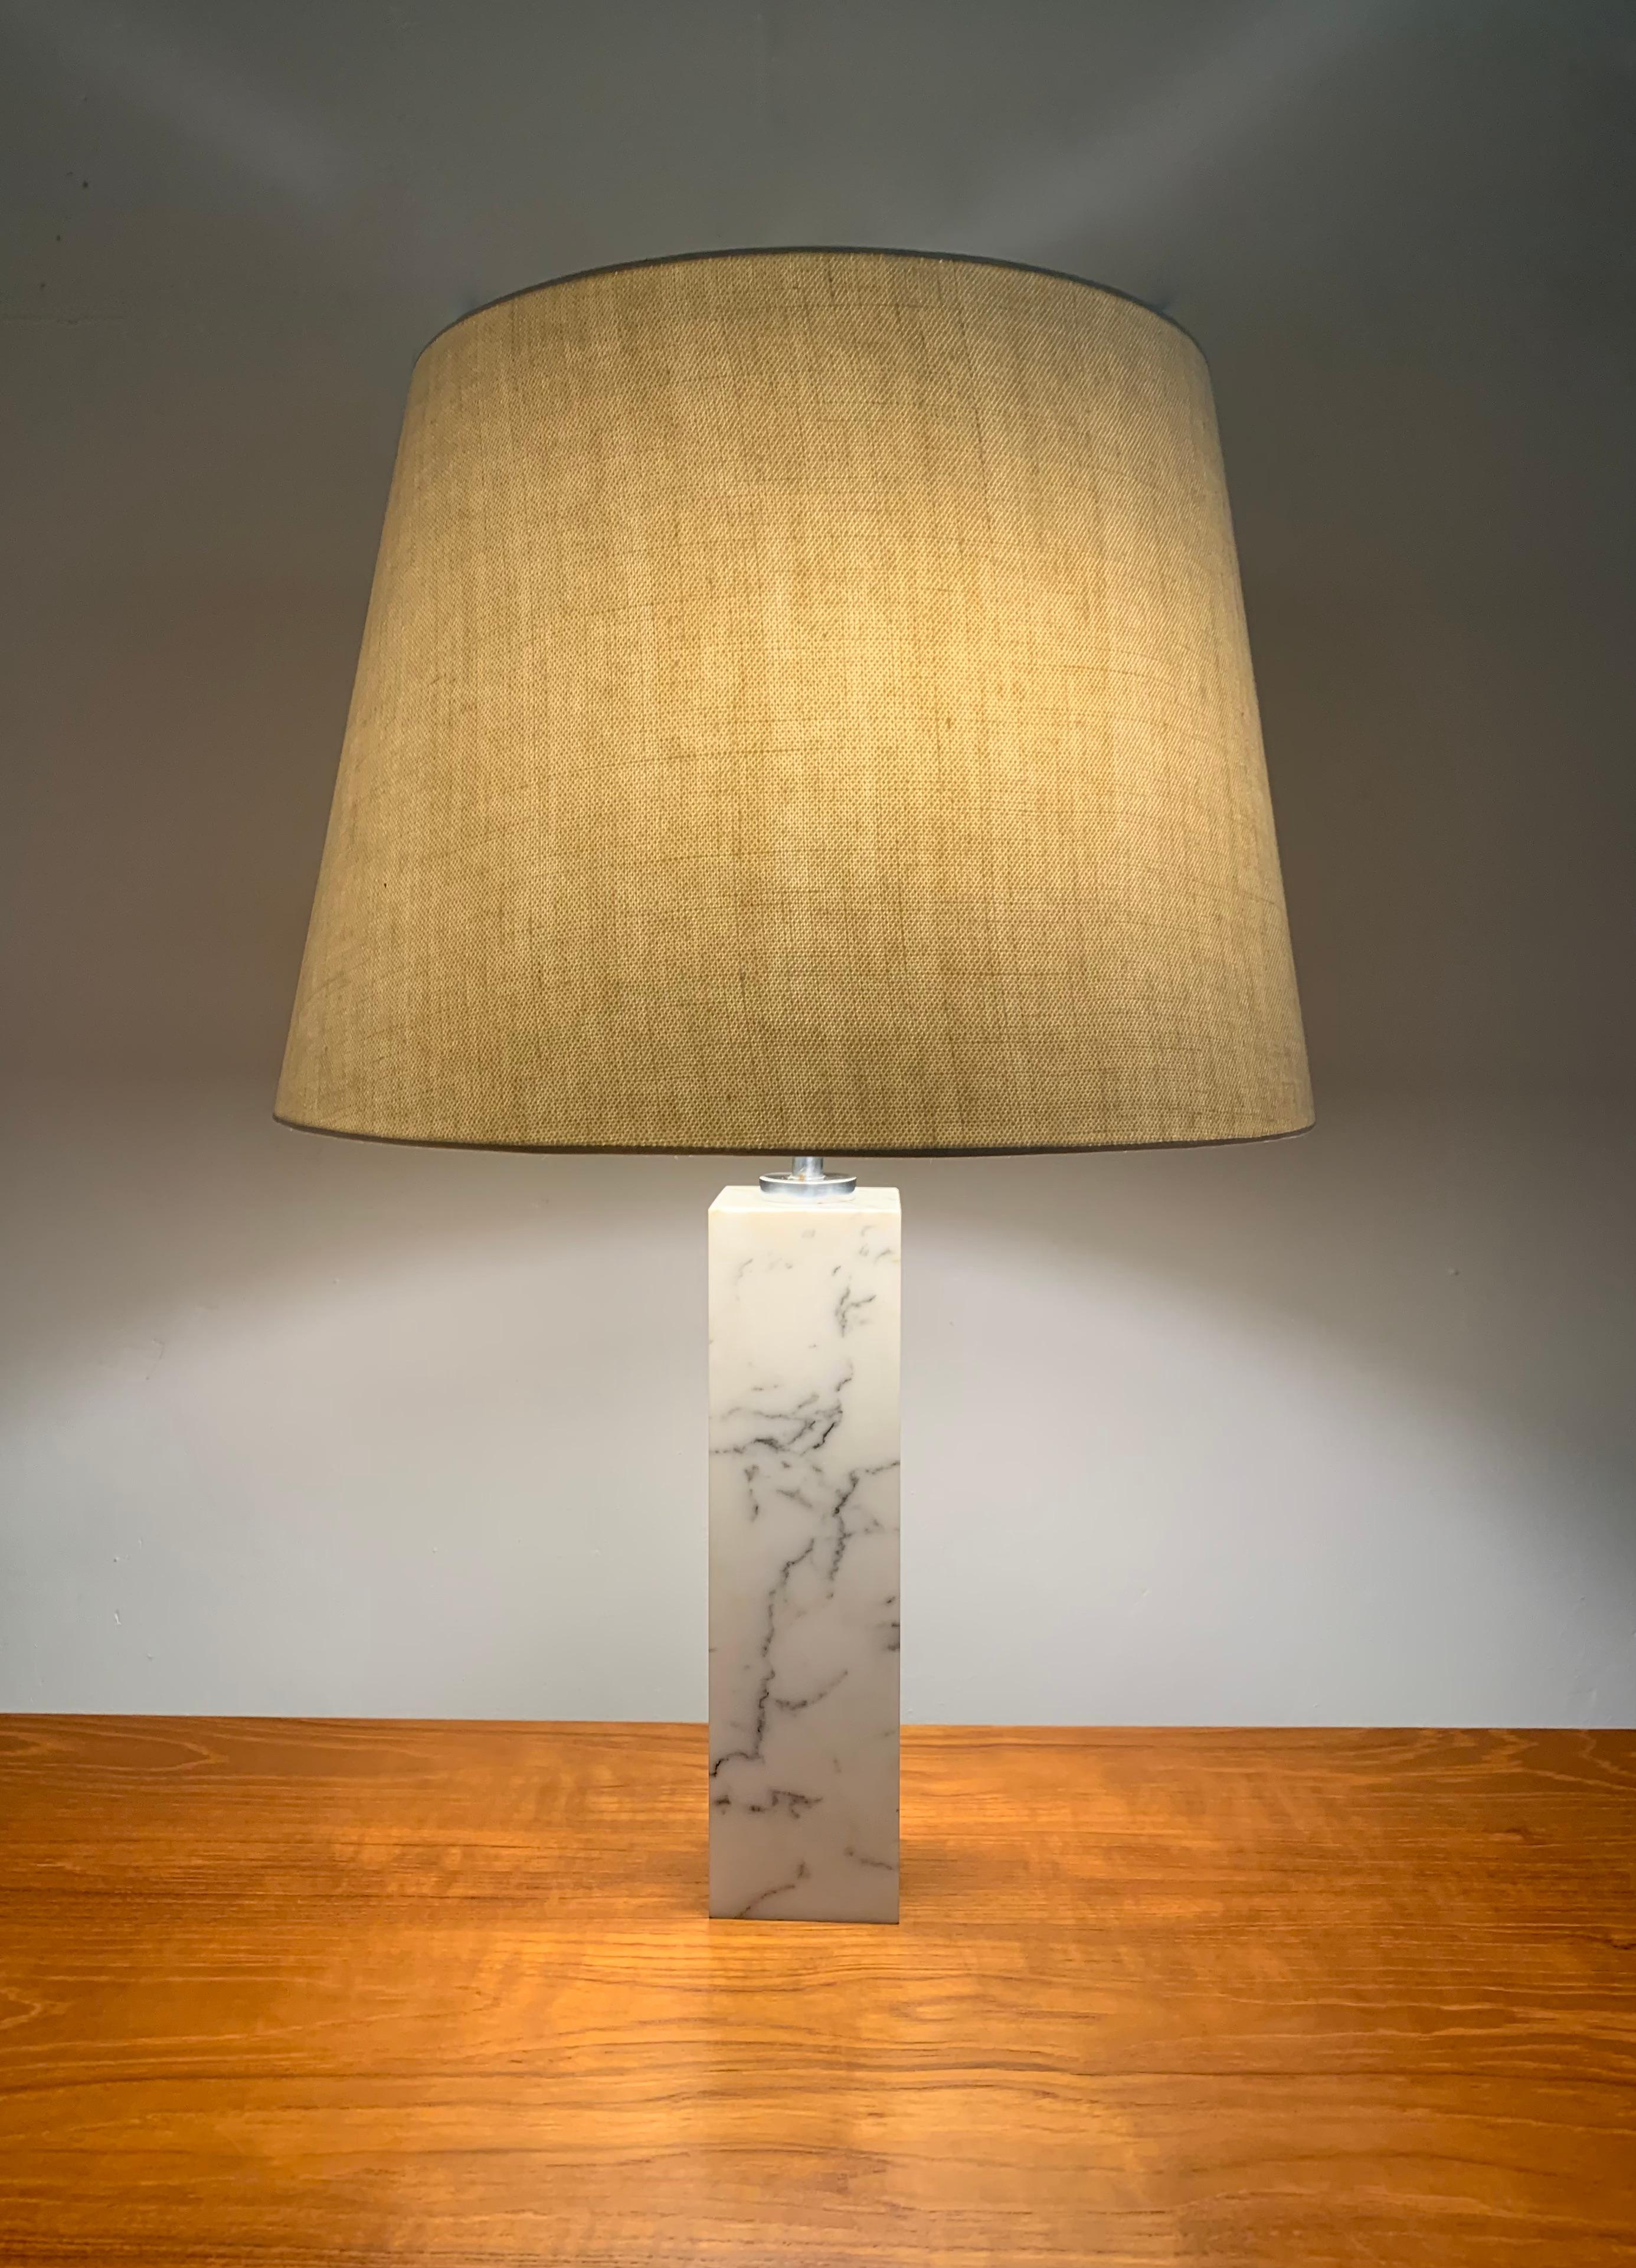 Carrara marble square base table lamp model 180 by Florence Knoll. 
Edited by Knoll International during the 1960's. 

Lamp is equipped with its original shade which has been reupholstered in a lovely cotton and linnen fabric close to the